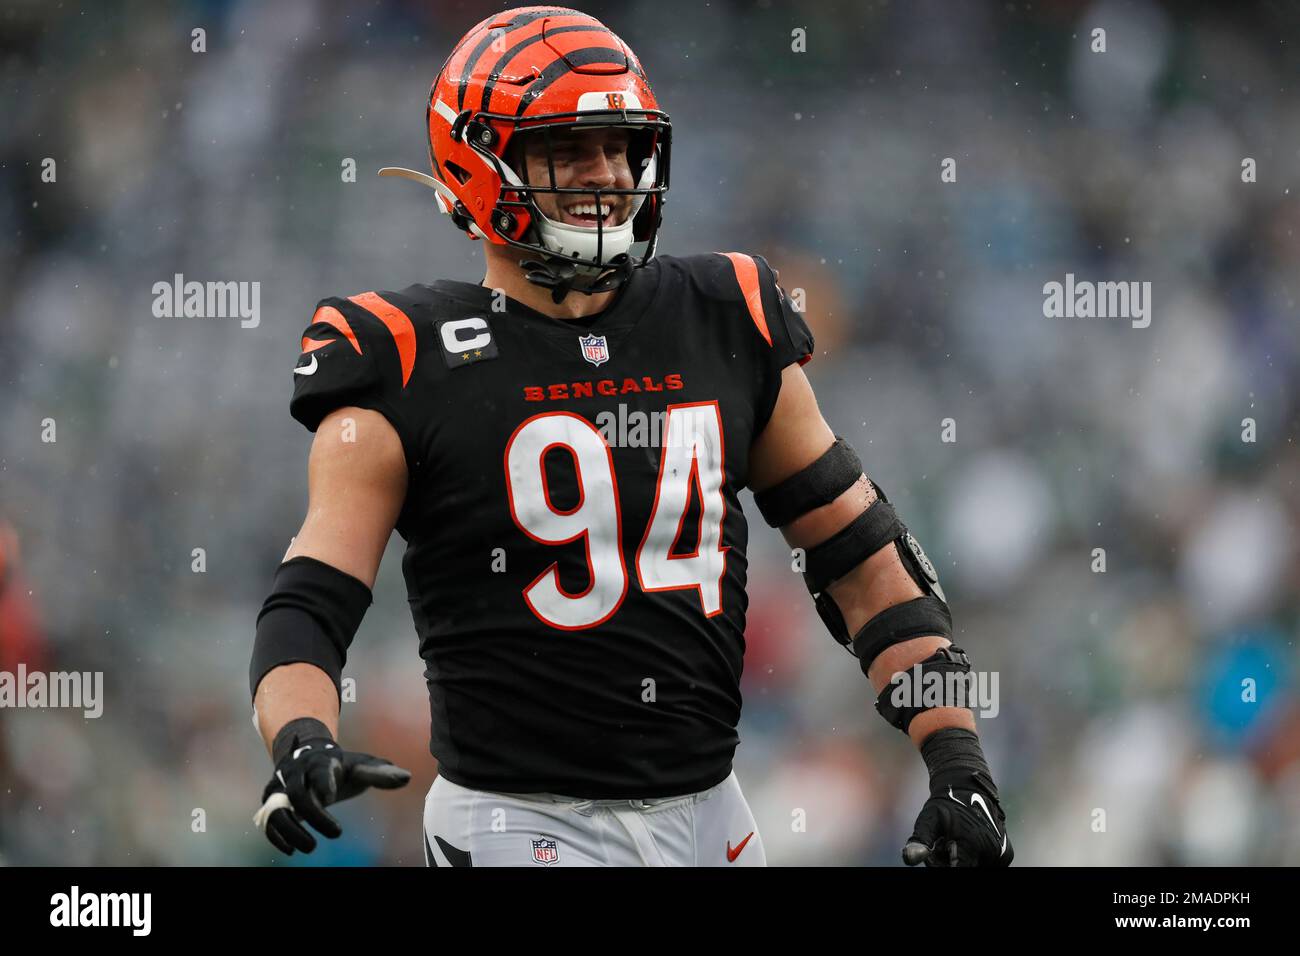 Cincinnati Bengals defensive end Sam Hubbard (94) celebrates after a play  during an NFL football game against the New York Jets, Sunday, Sept. 25,  2022, in East Rutherford, N.J. The Cincinnati Bengals